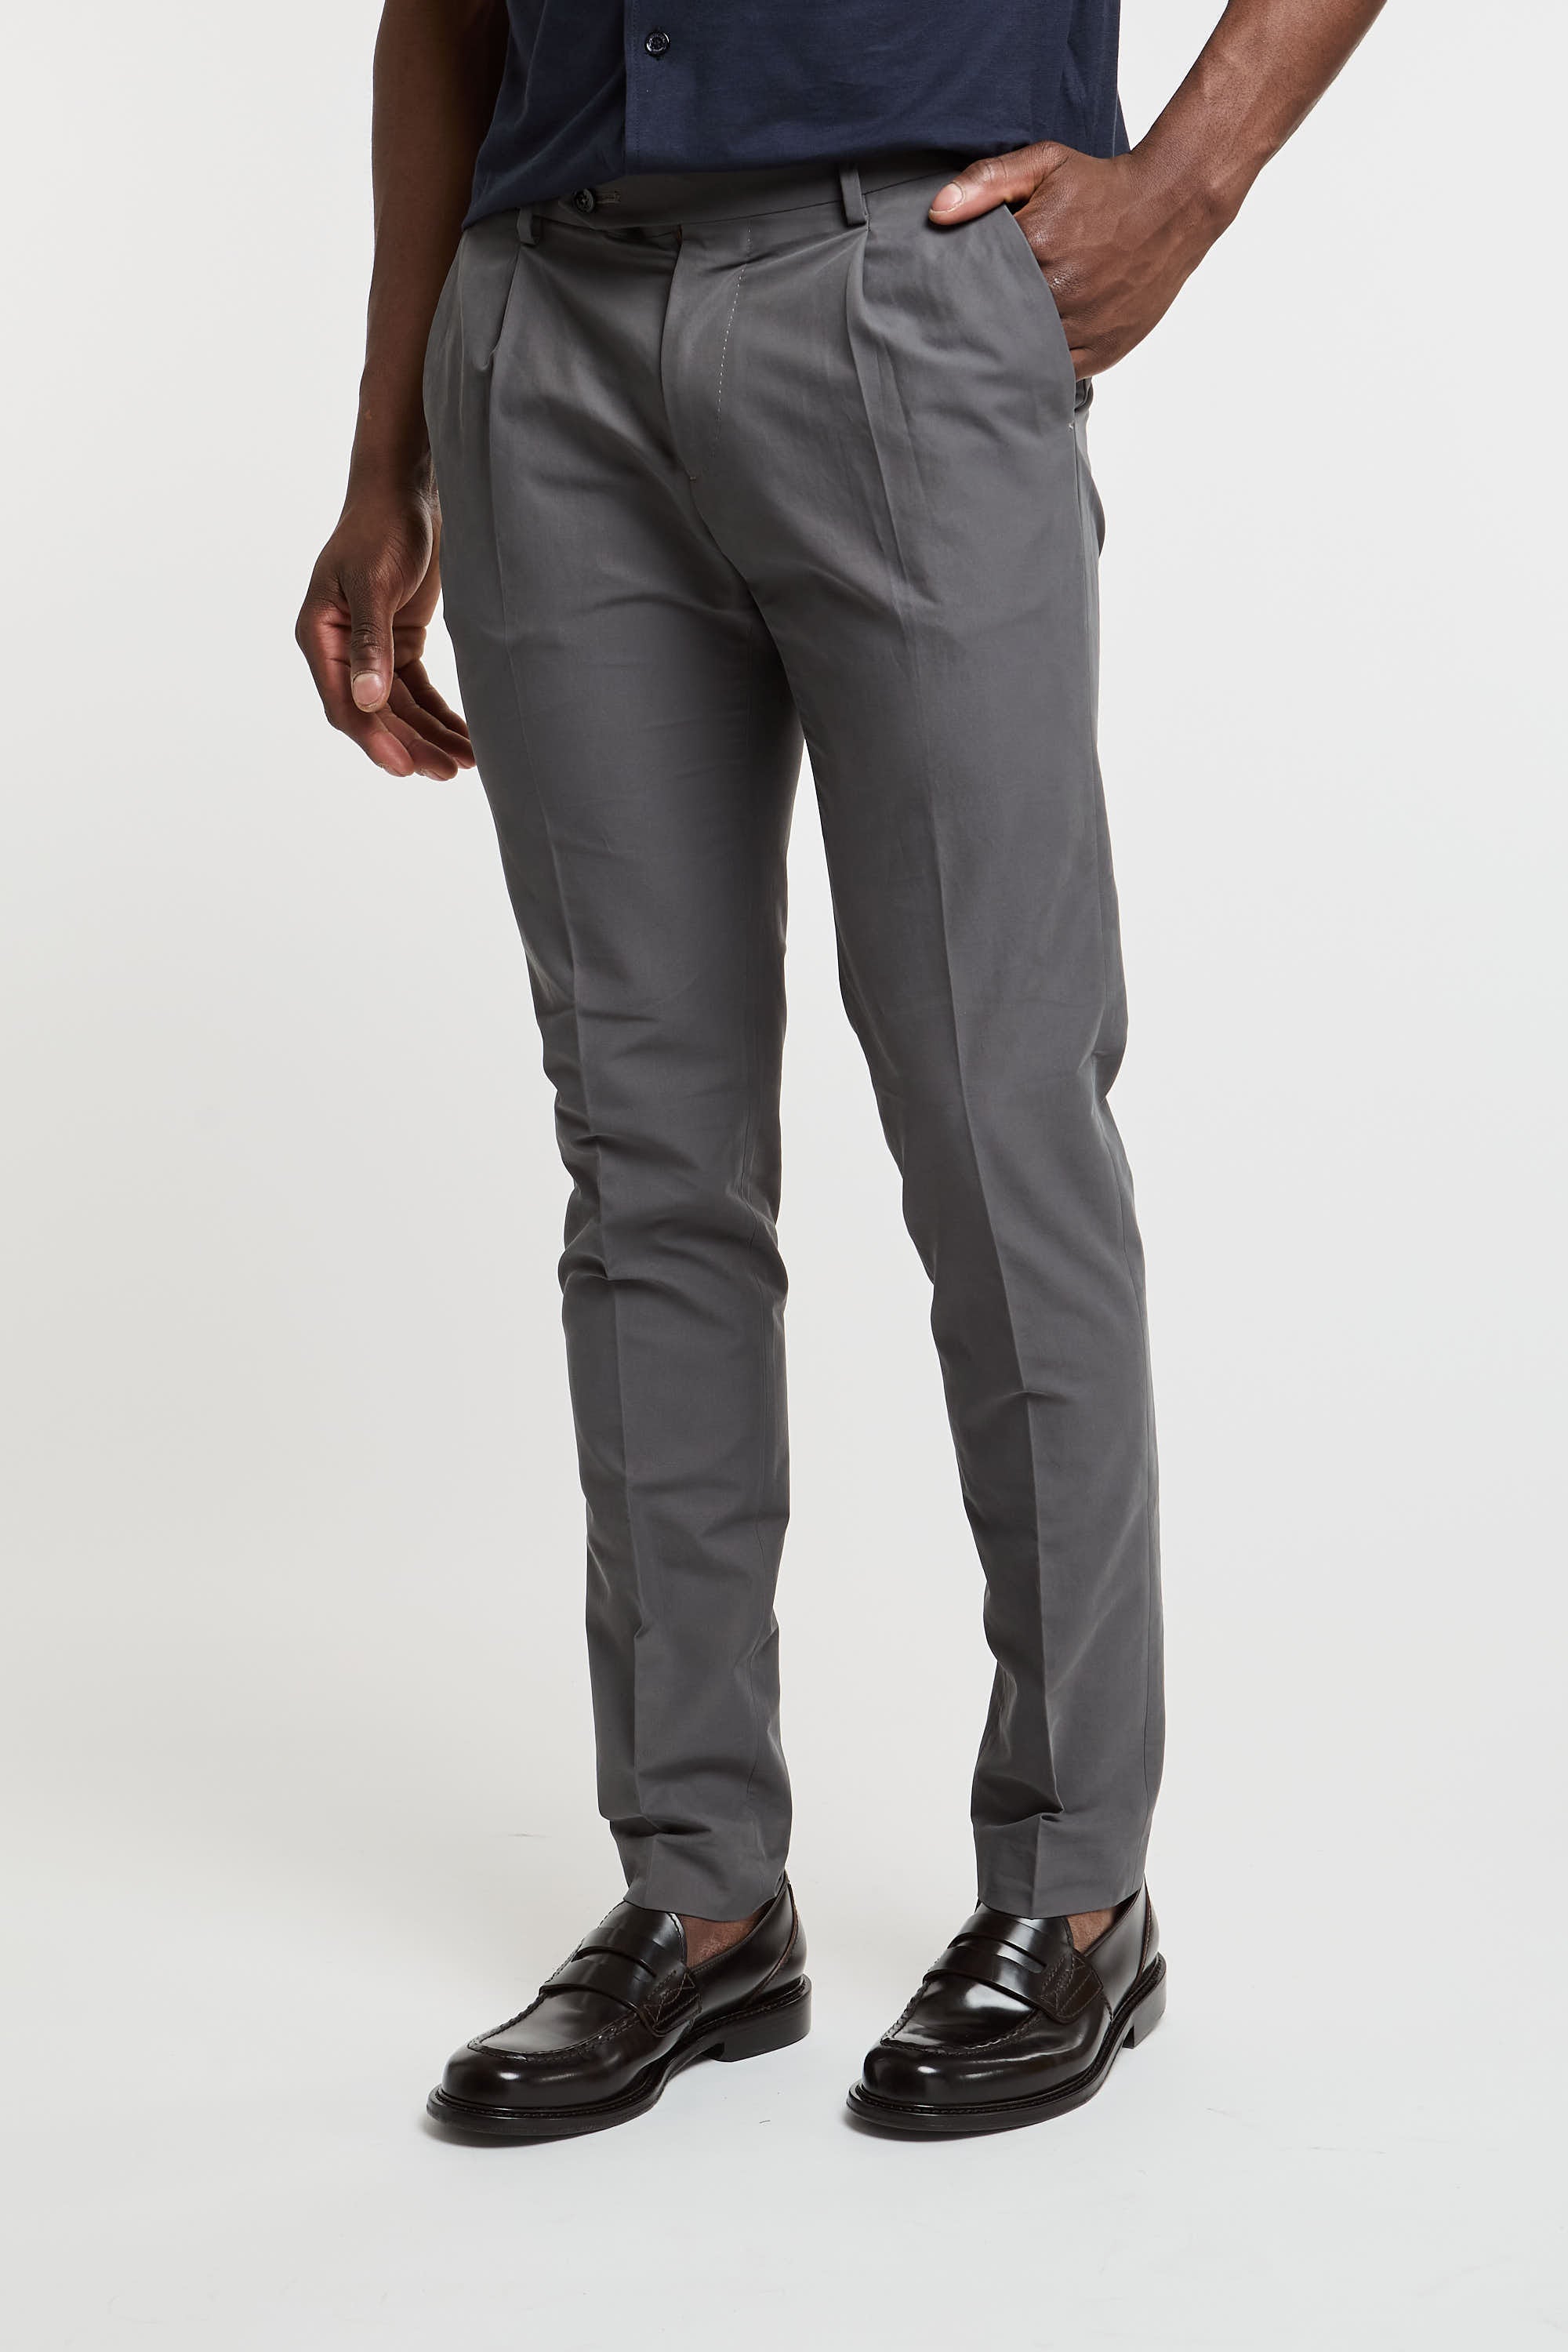 Berwich Trousers with Pleats Cotton/Polyamide Grey-3